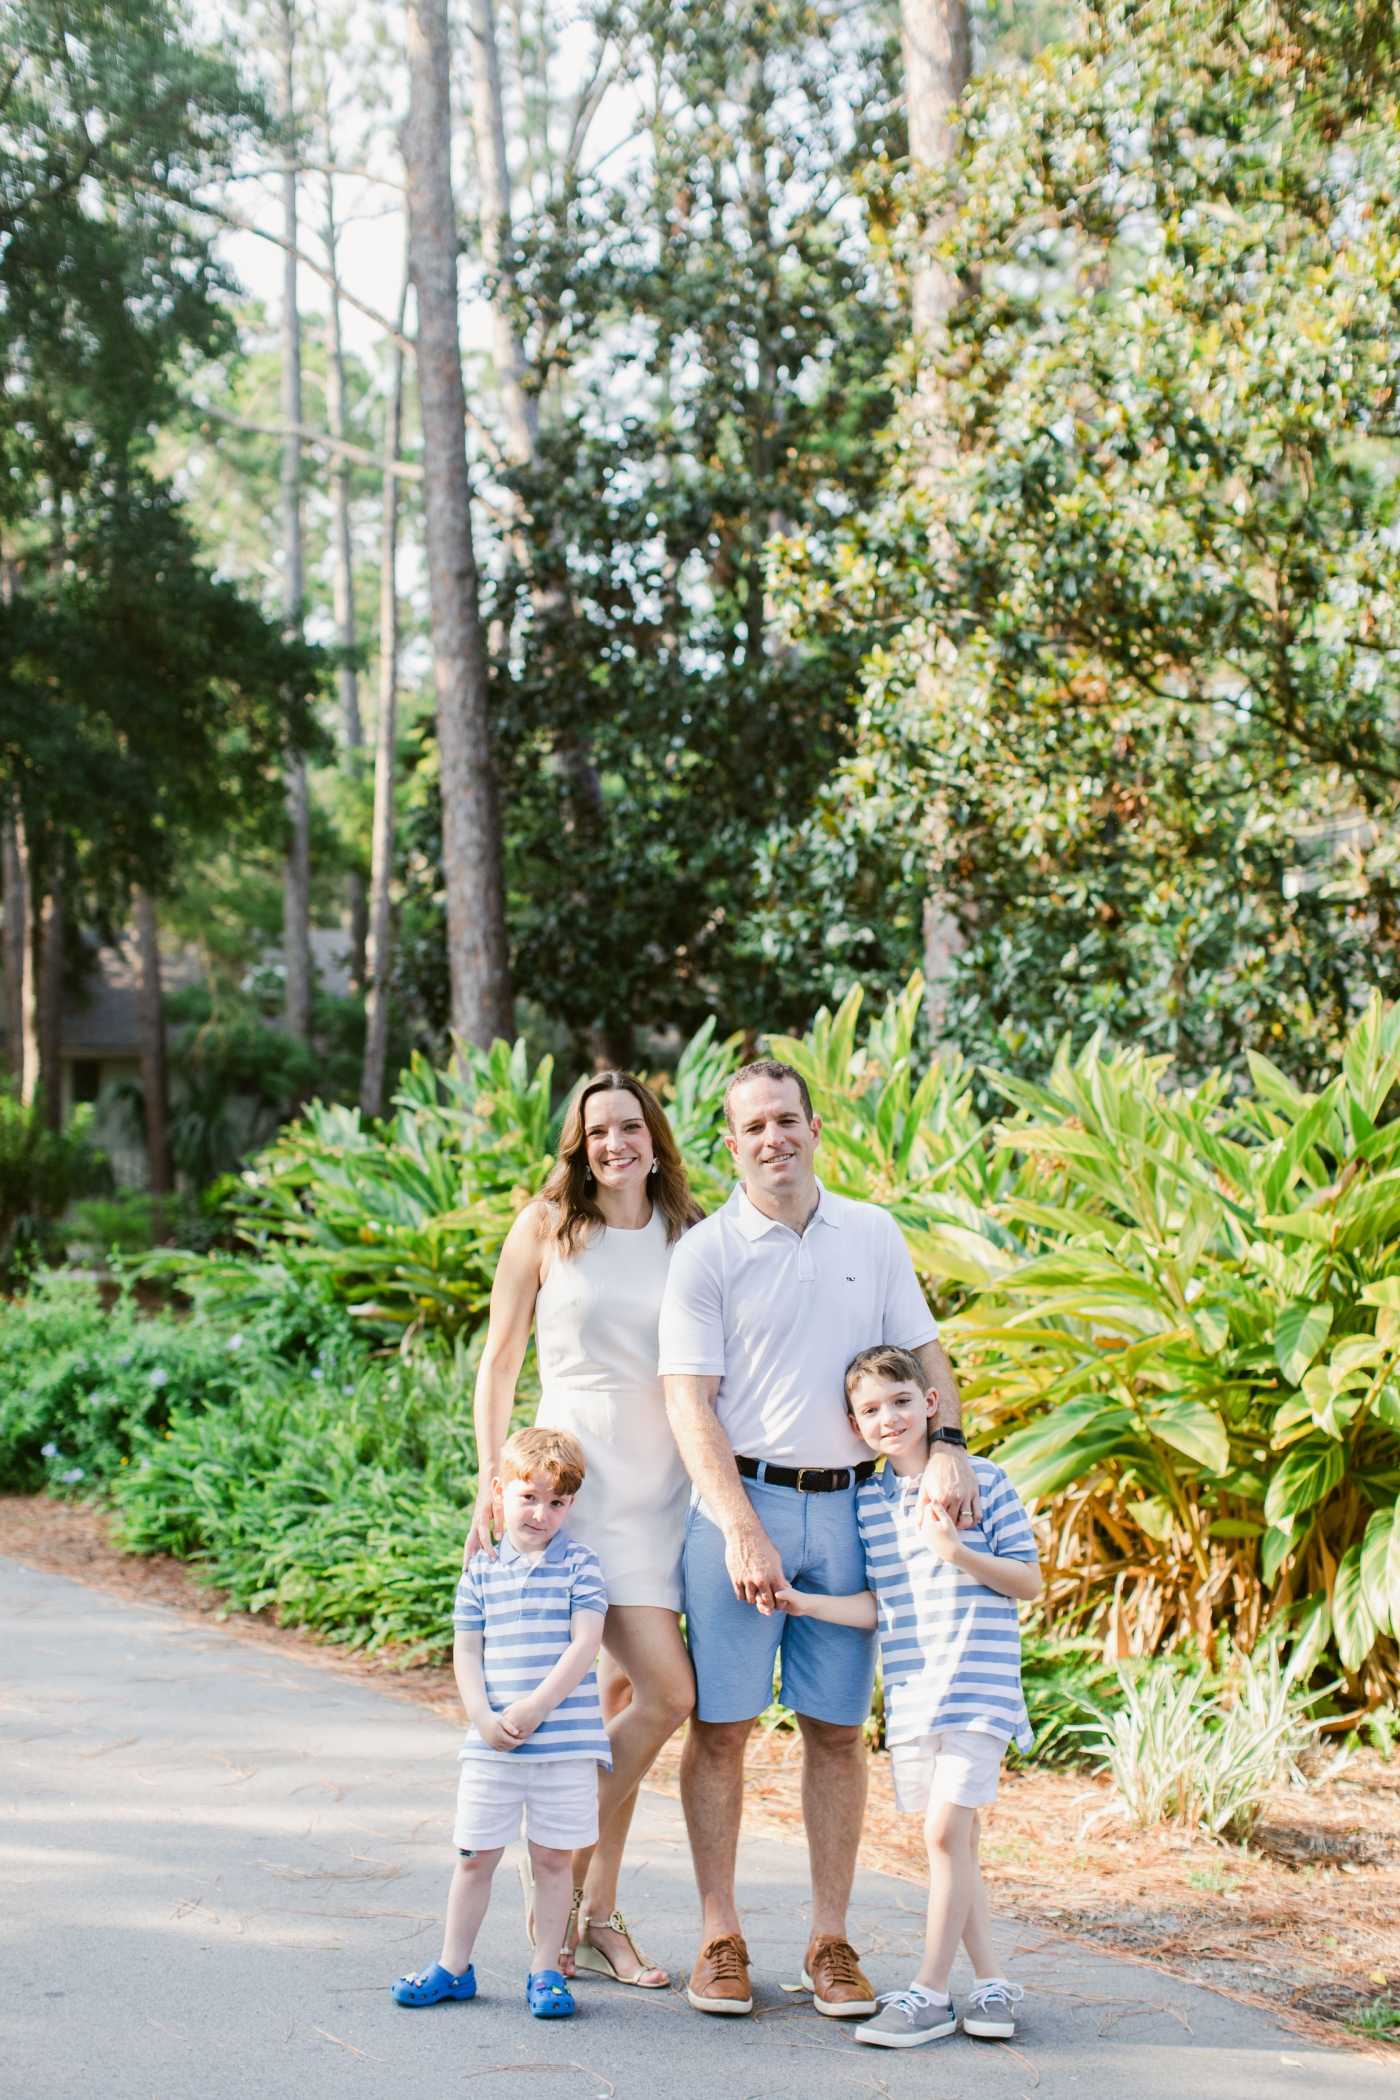 Blue, white, and khaki outfits for an outdoor family session